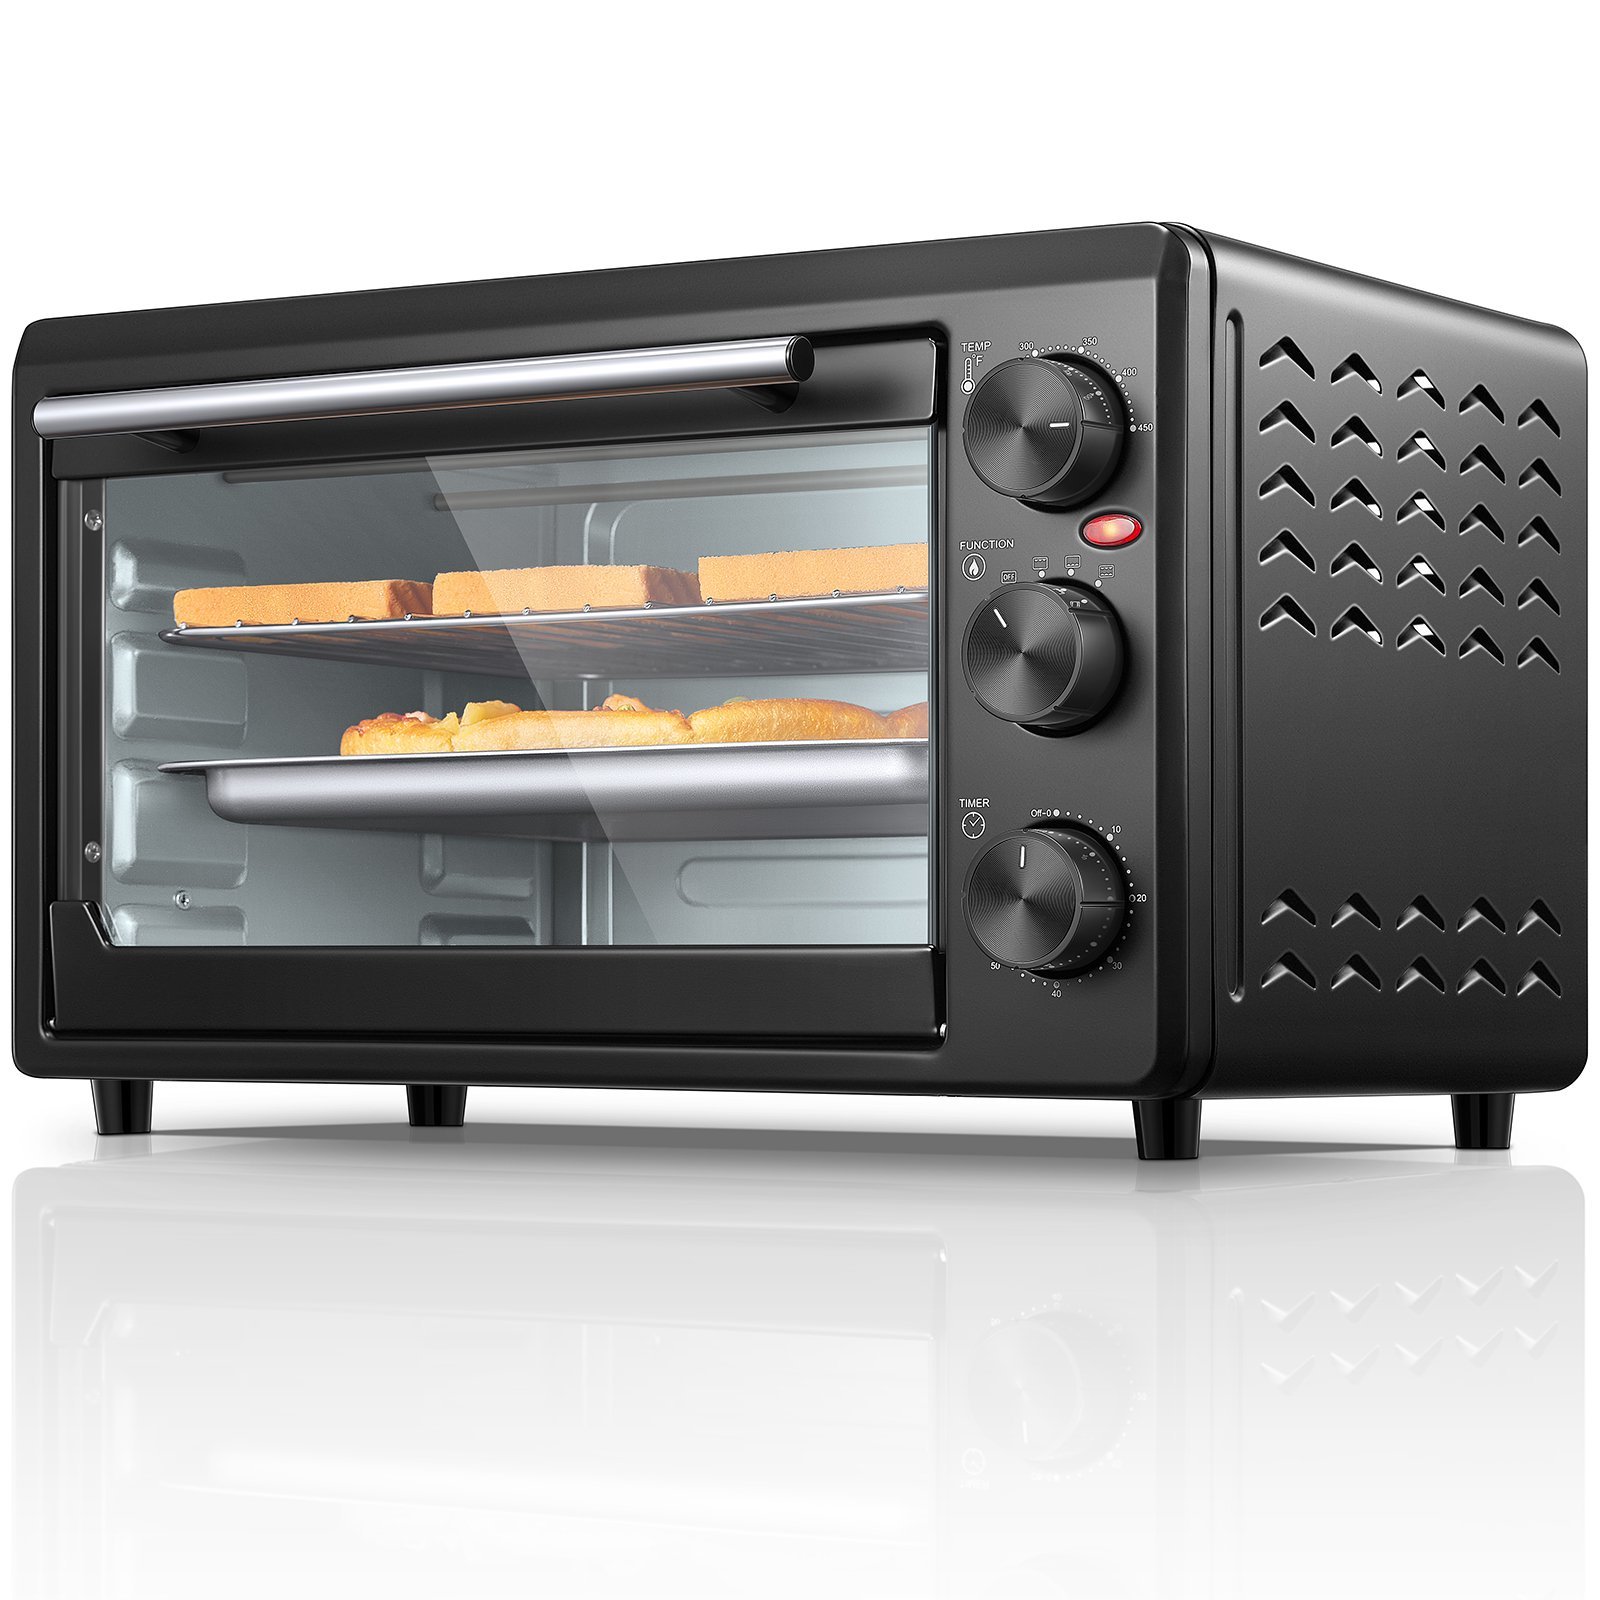 https://themarketdepot.com/wp-content/uploads/2023/01/AICOOK-Toaster-Oven-6-Slice-Toaster-and-Countertop-Oven-Stainless-Steel-Multifunction-Toaster-Oven-with-Timer-Toast-Bake-Broil-1500-Watt-Power-Includes-Baking-Pan-and-Baking-Rack-Black-1.jpeg